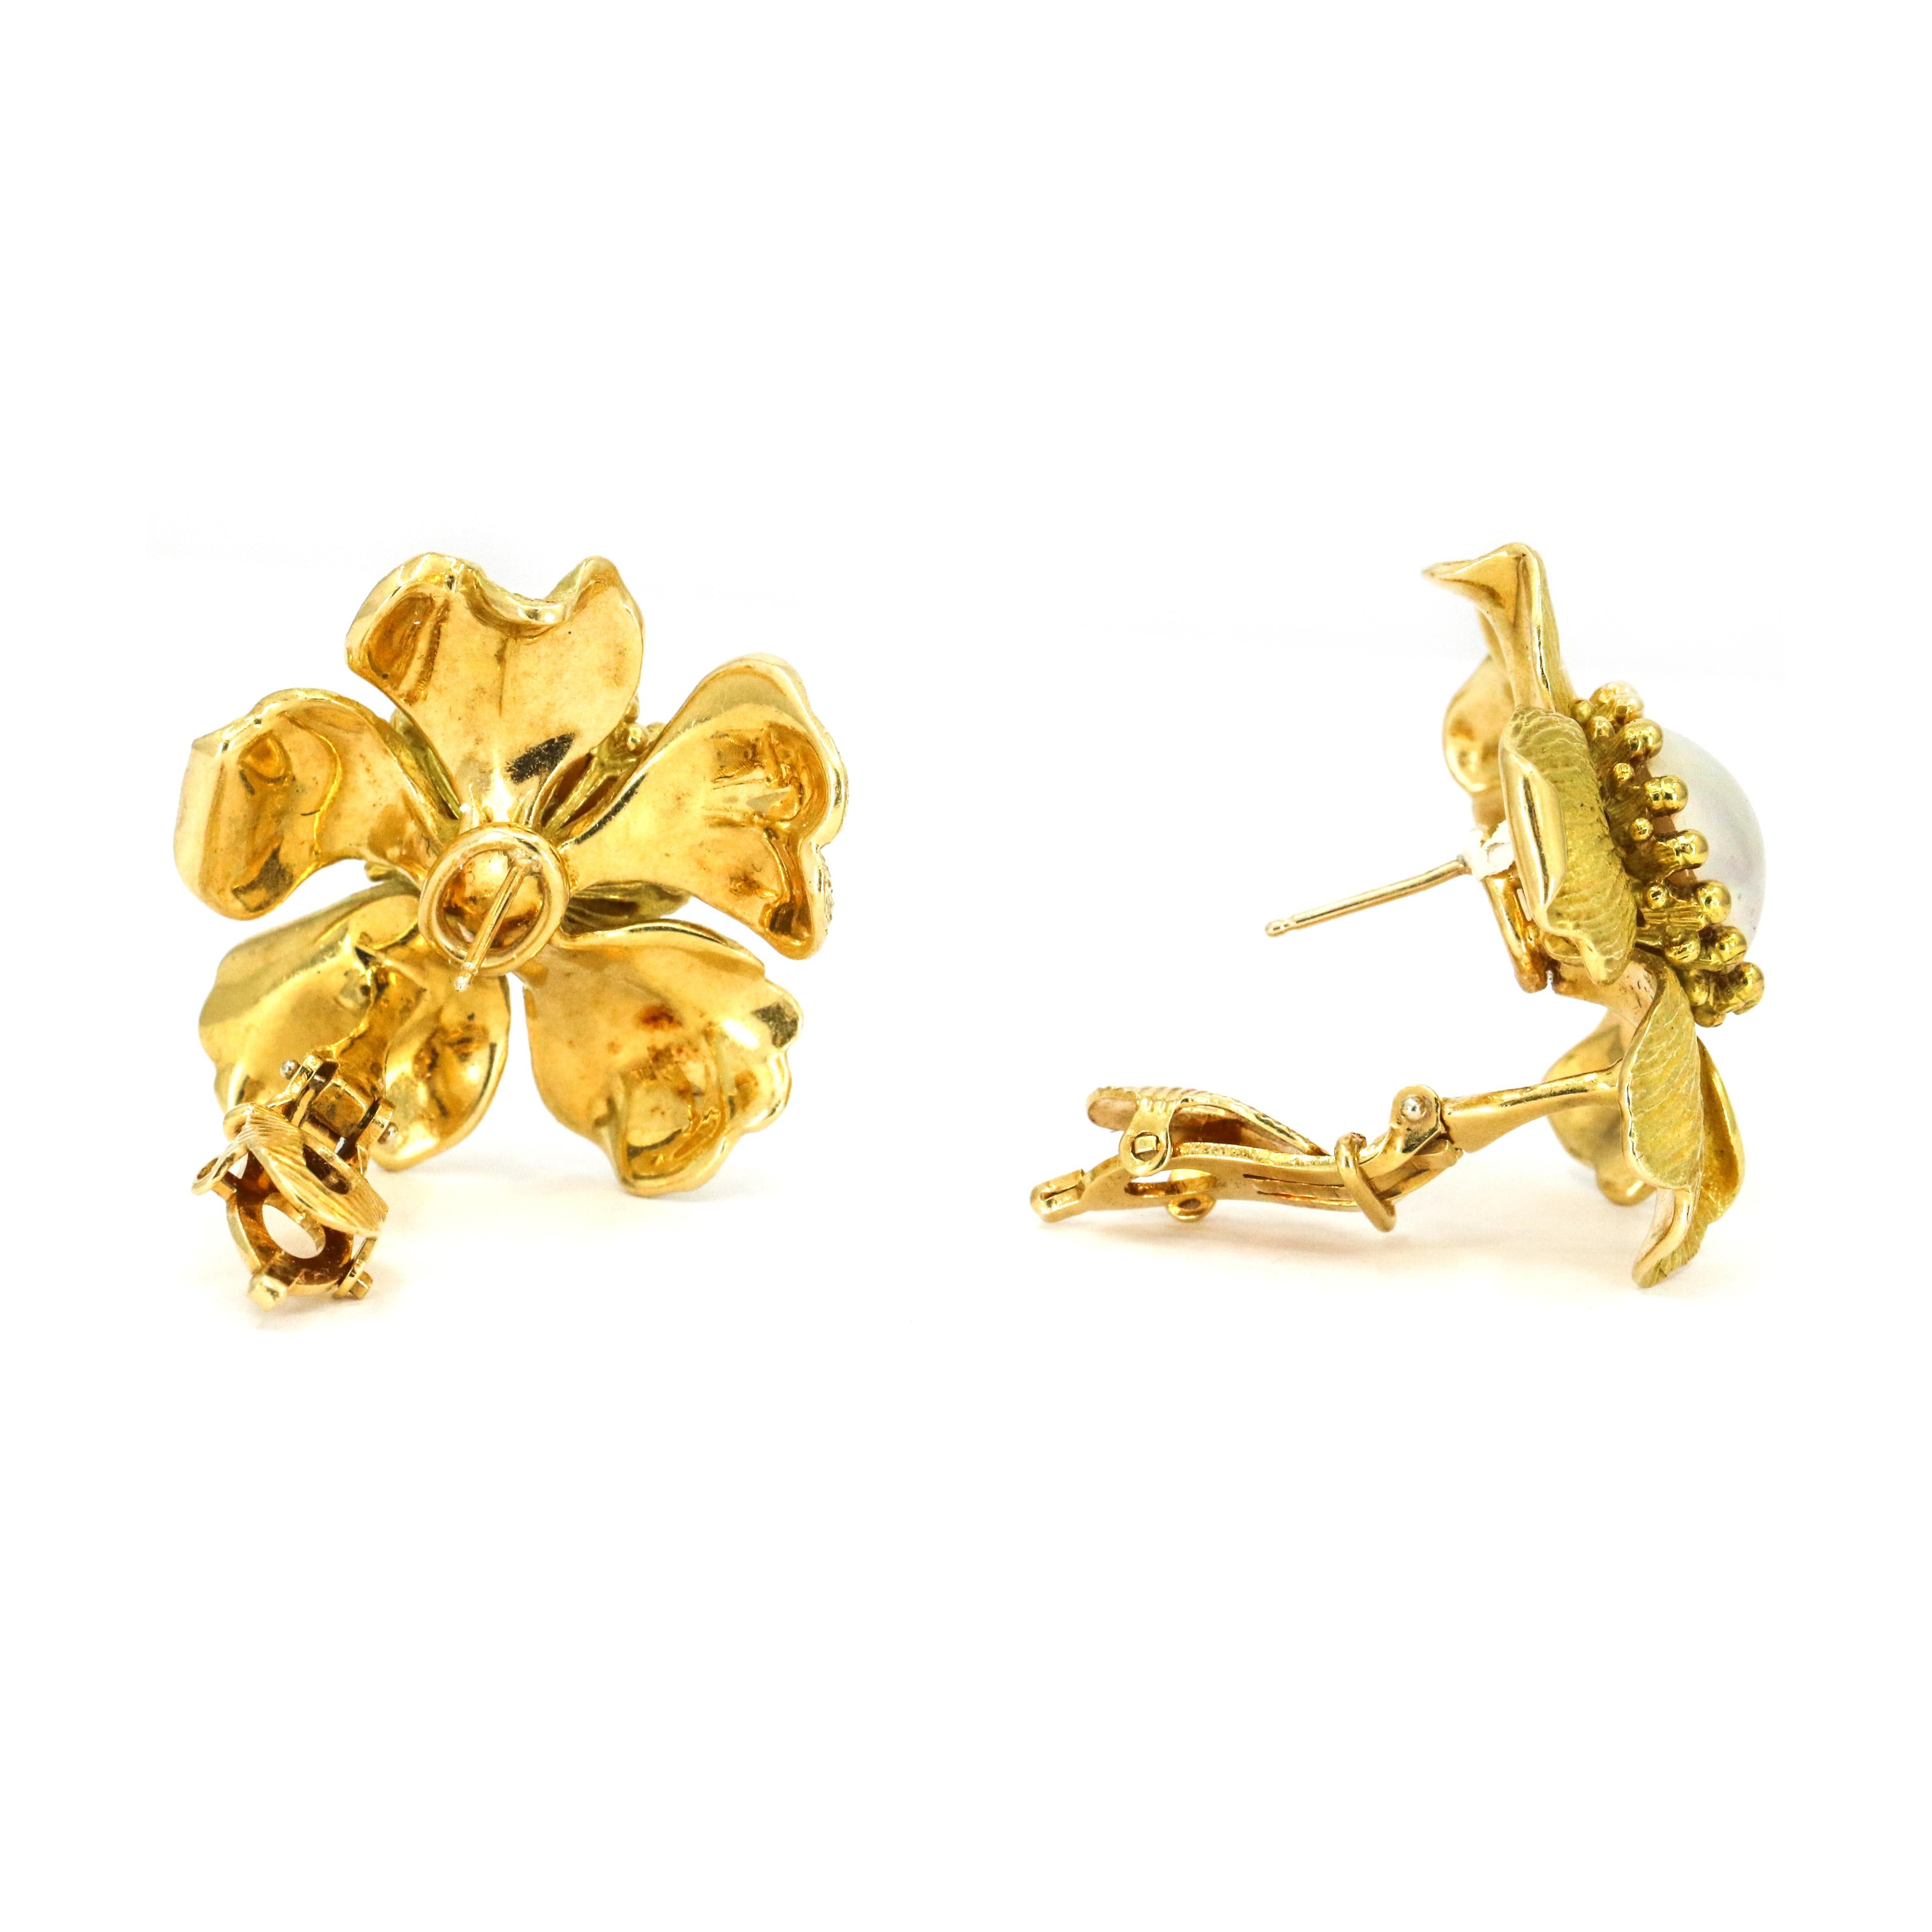 Tiffany & Co. 18 Karat Yellow Gold Pearl Rose Flower Earrings In Excellent Condition For Sale In Fort Lauderdale, FL